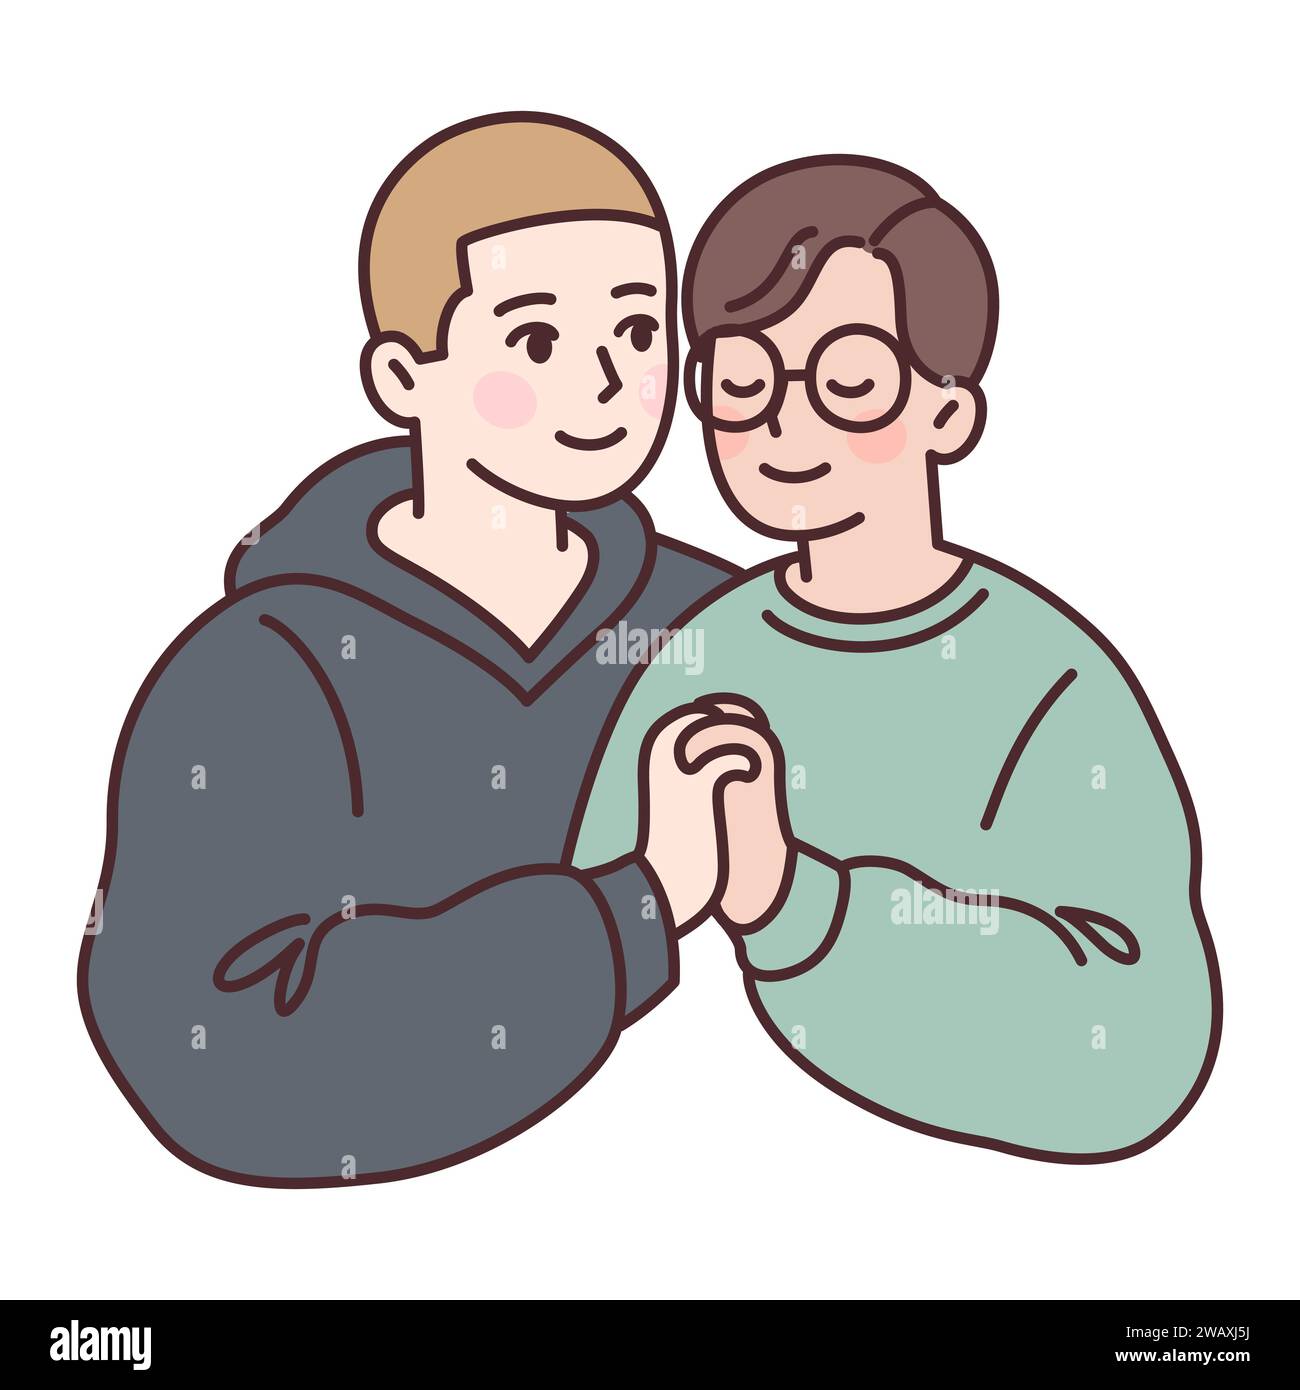 Cute young gay couple in love, two boys holding hands. Simple cartoon drawing, vector illustration. Stock Vector